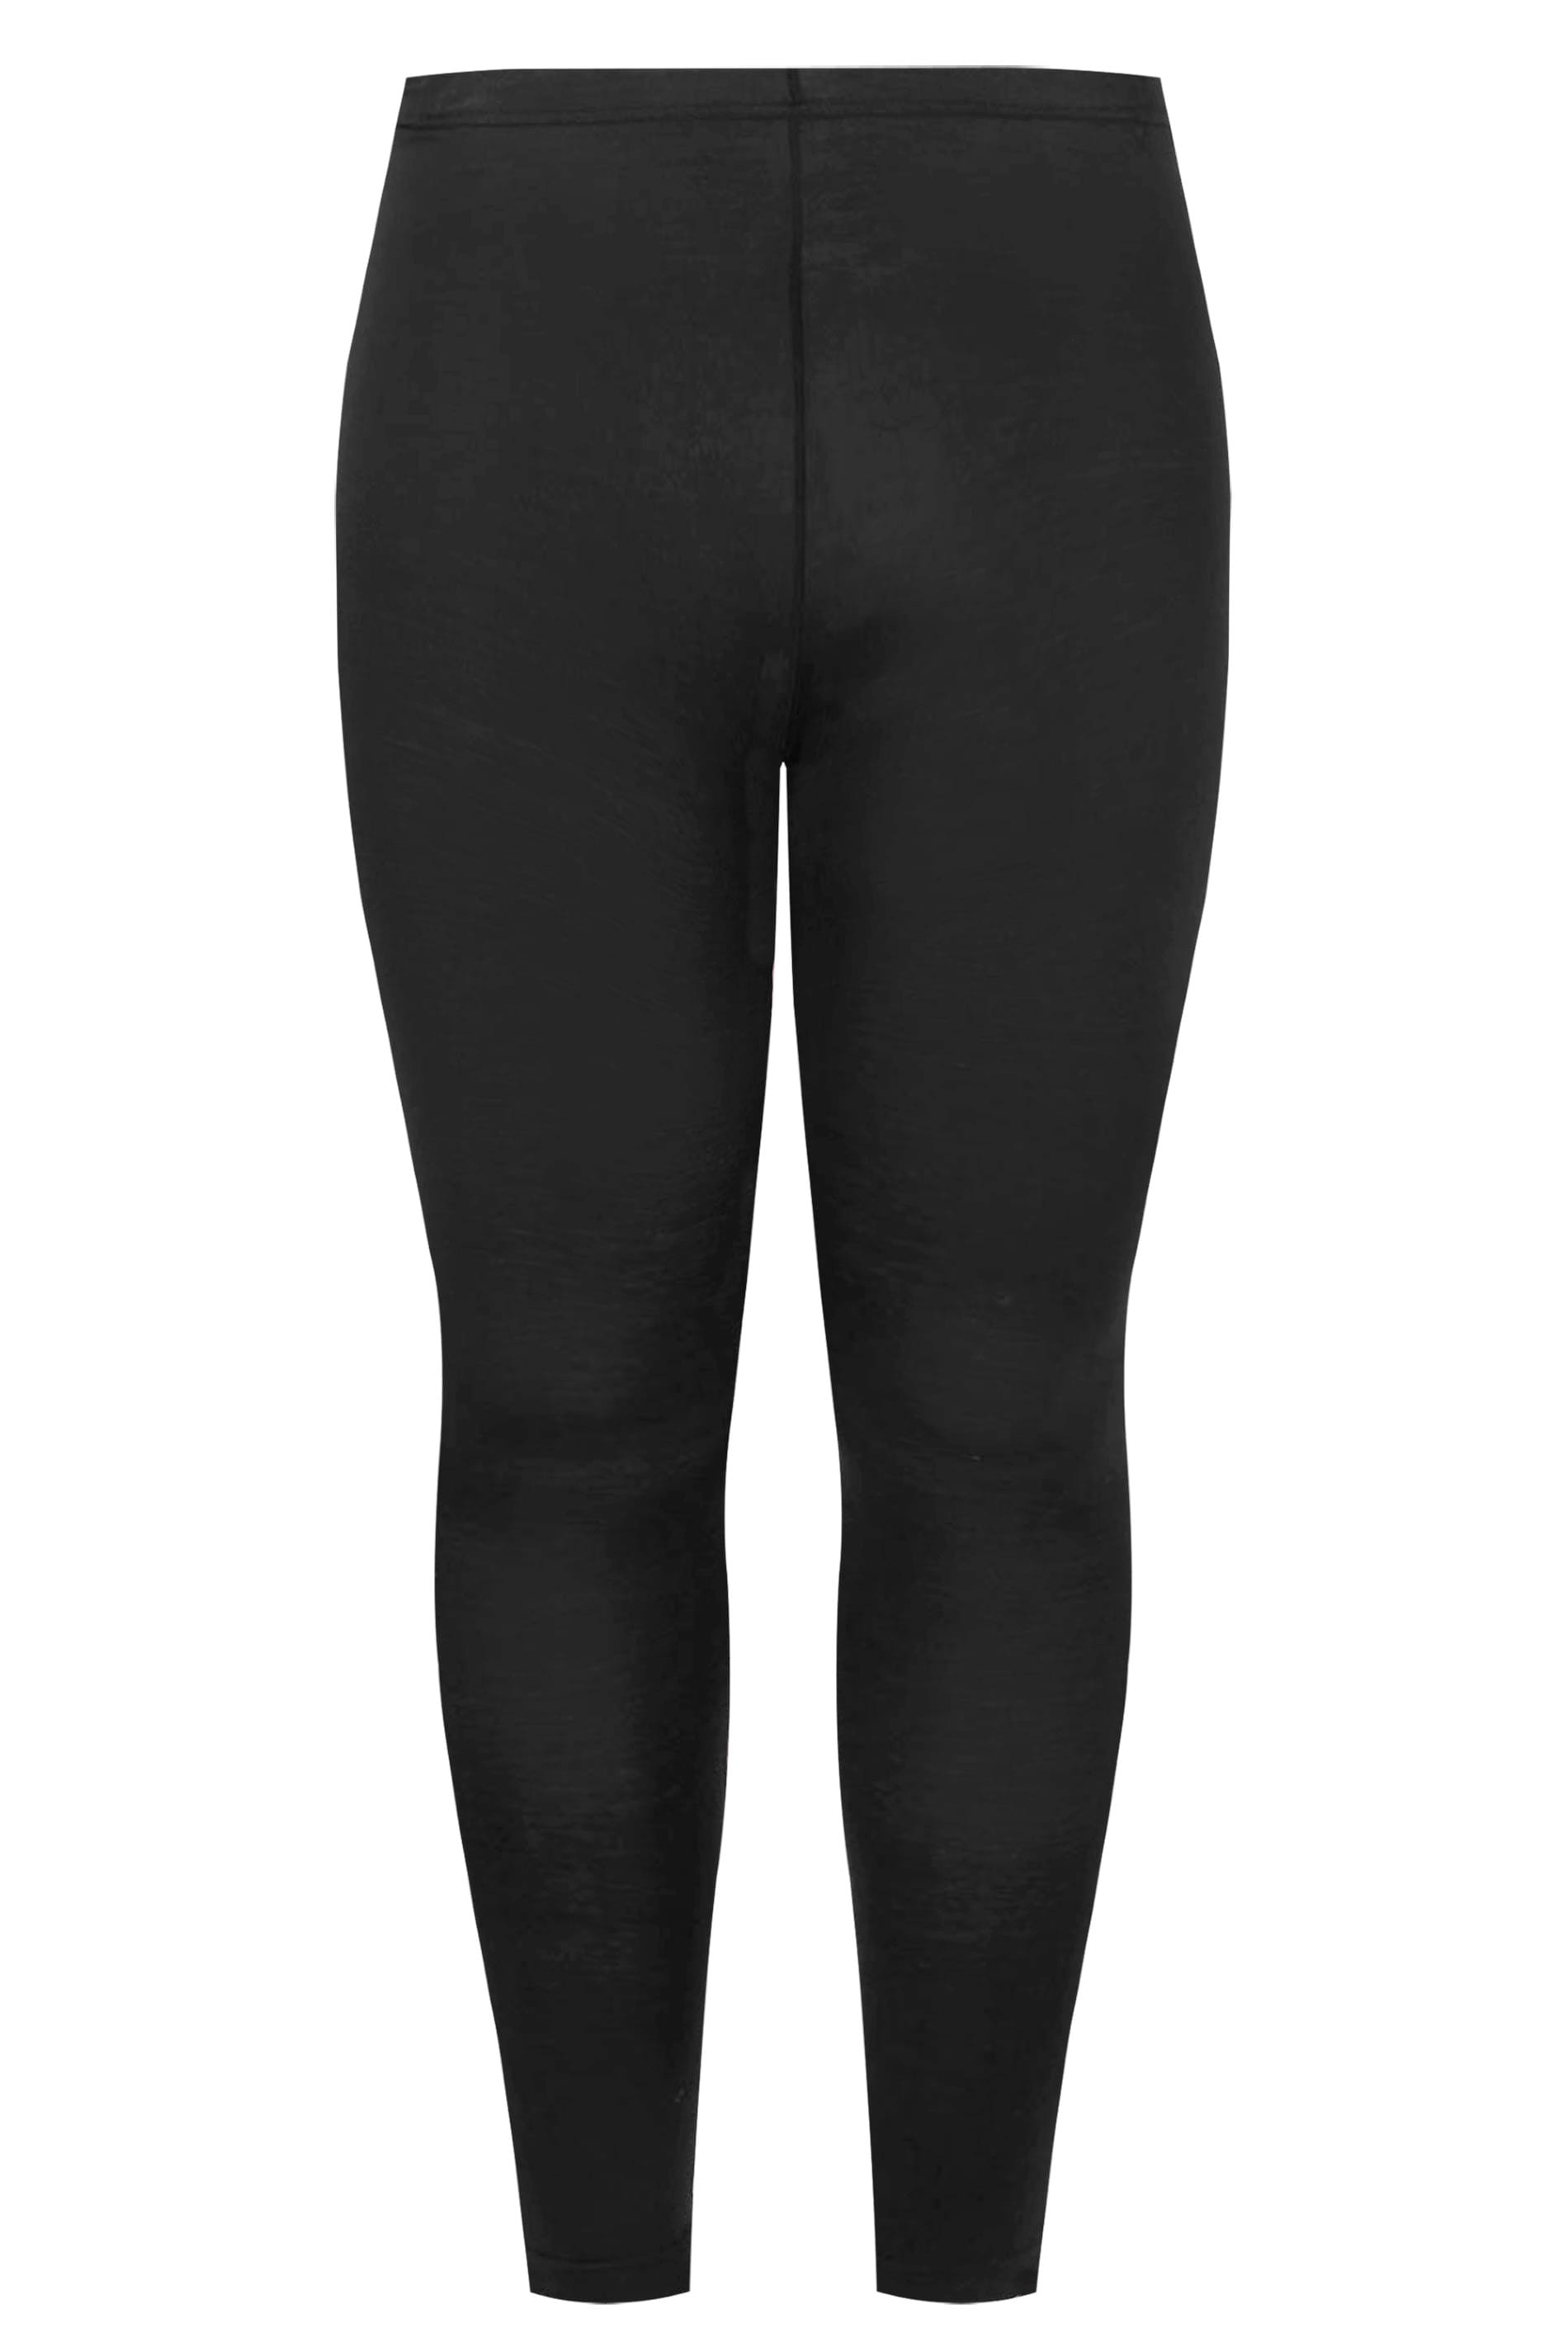 Schwarz Leggings | Yours Touch Soft - Clothing